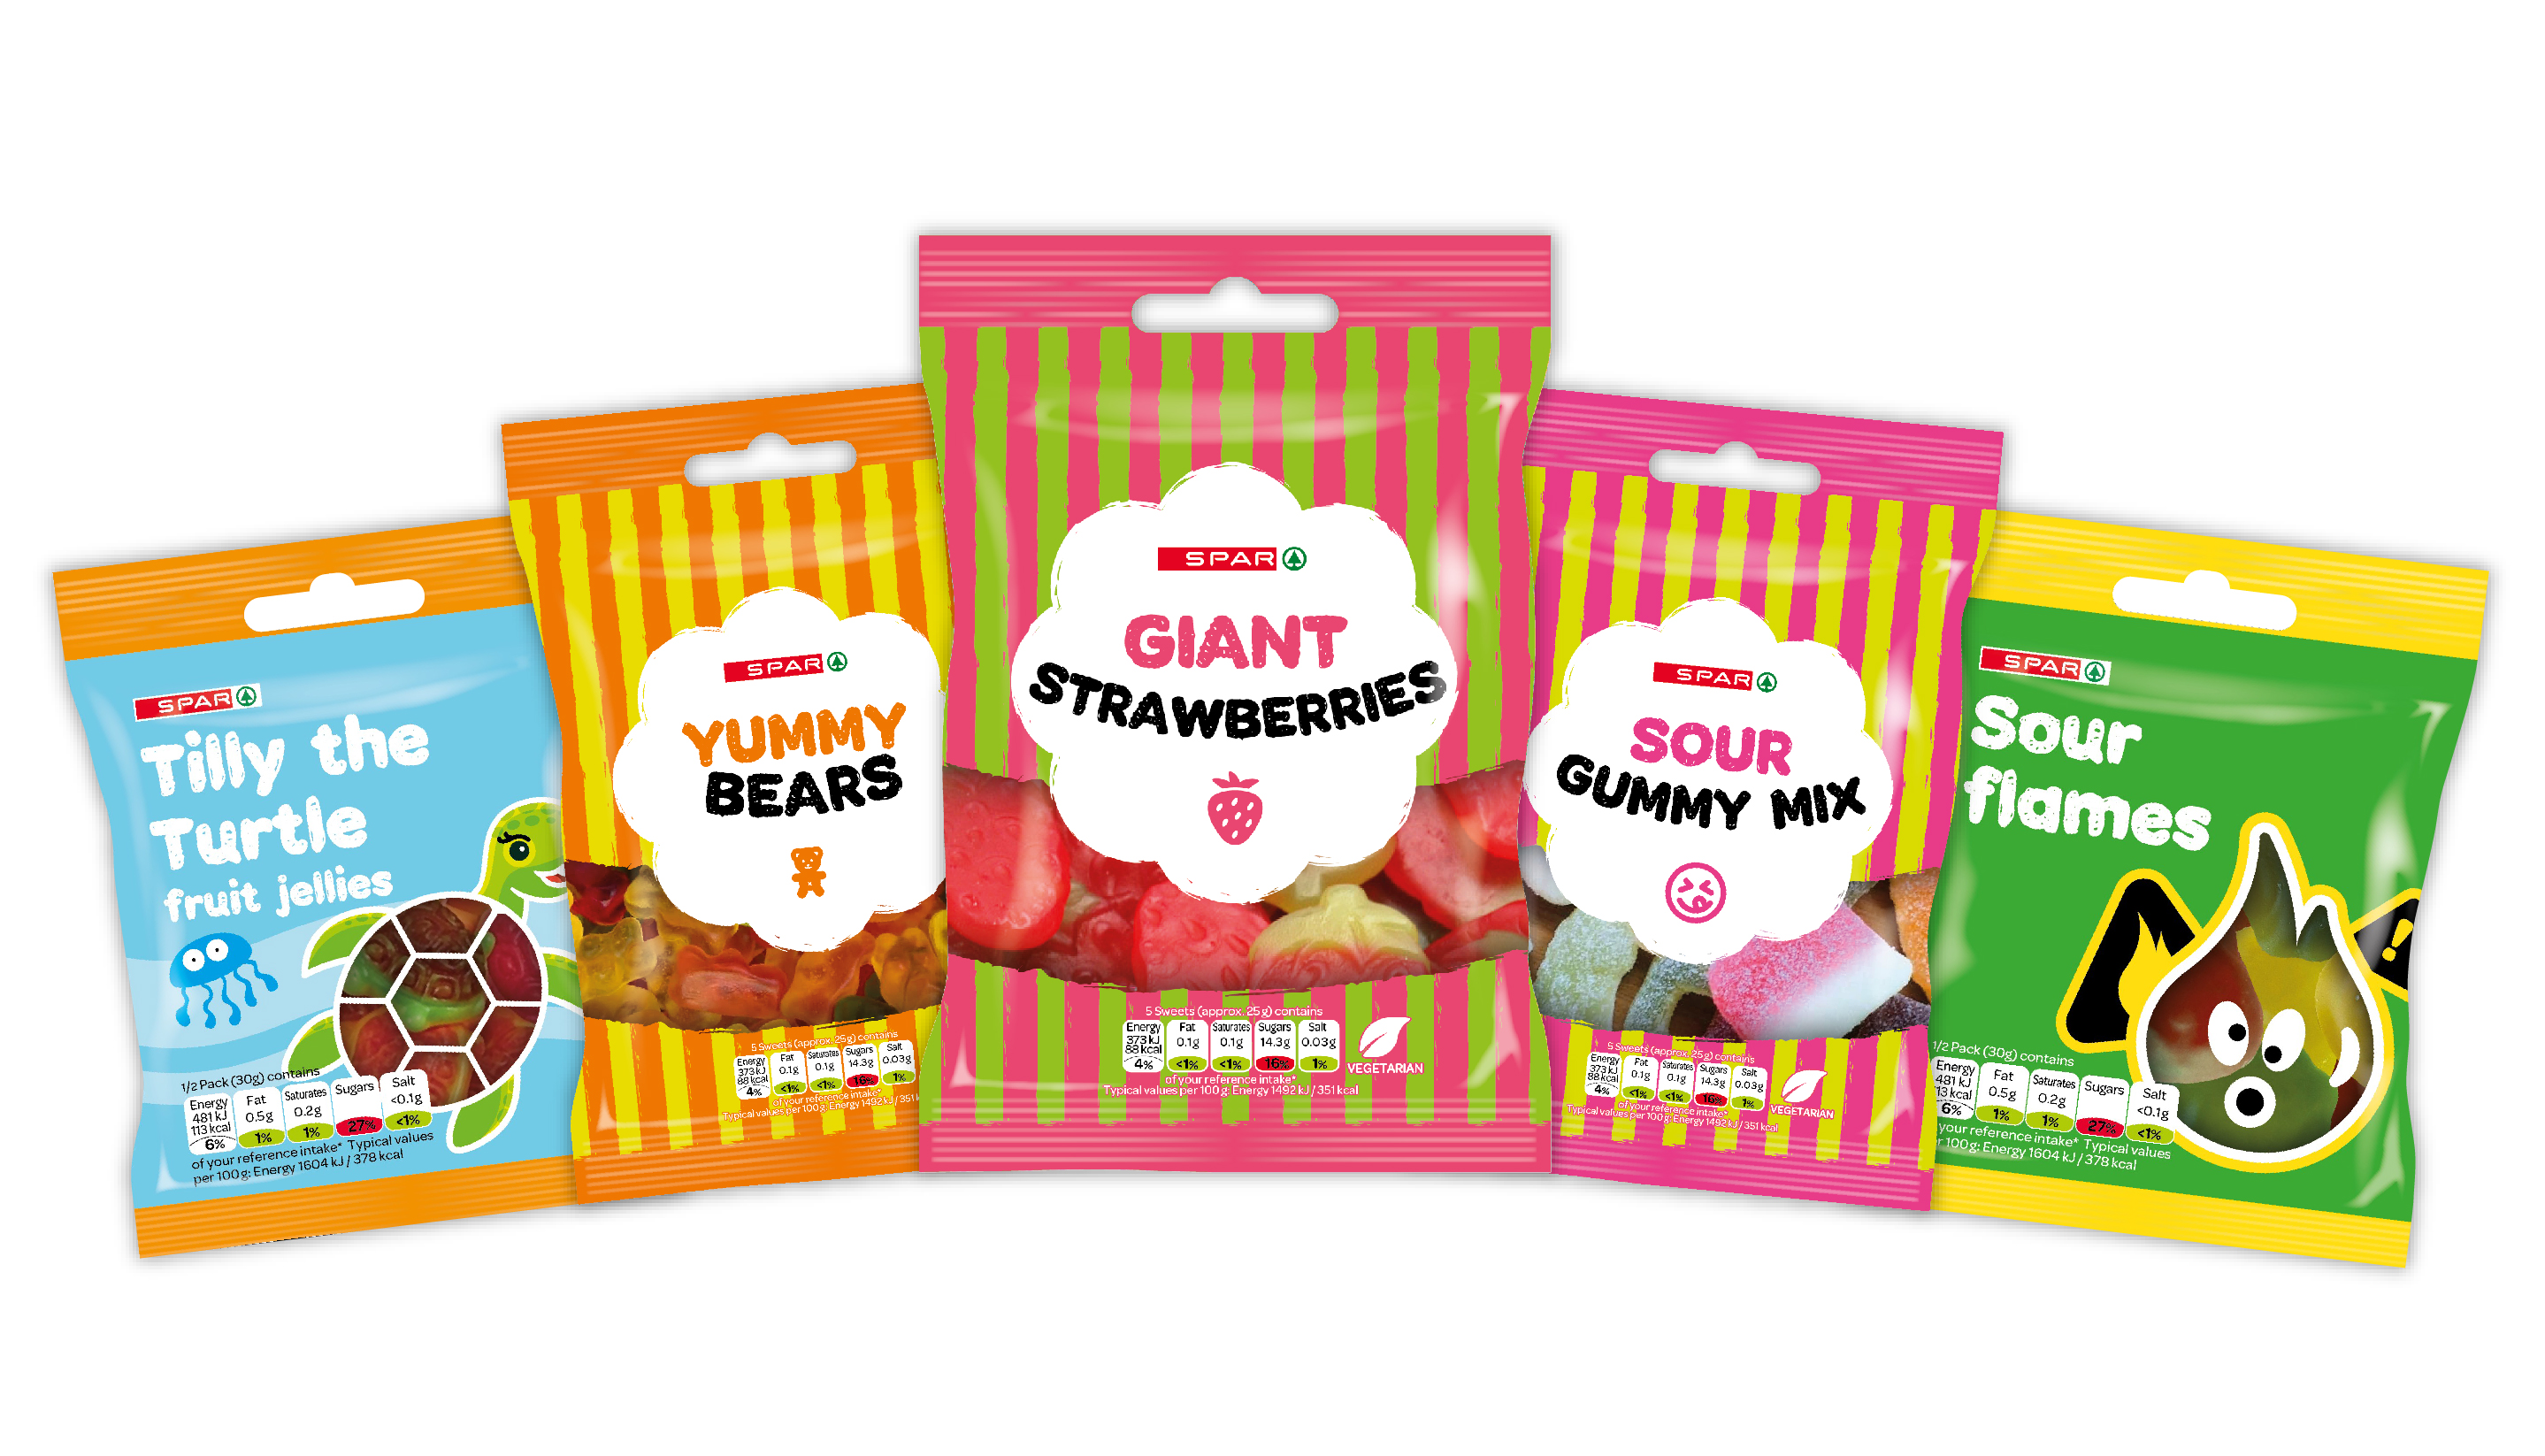 SPAR Brand launches tasty new sweets